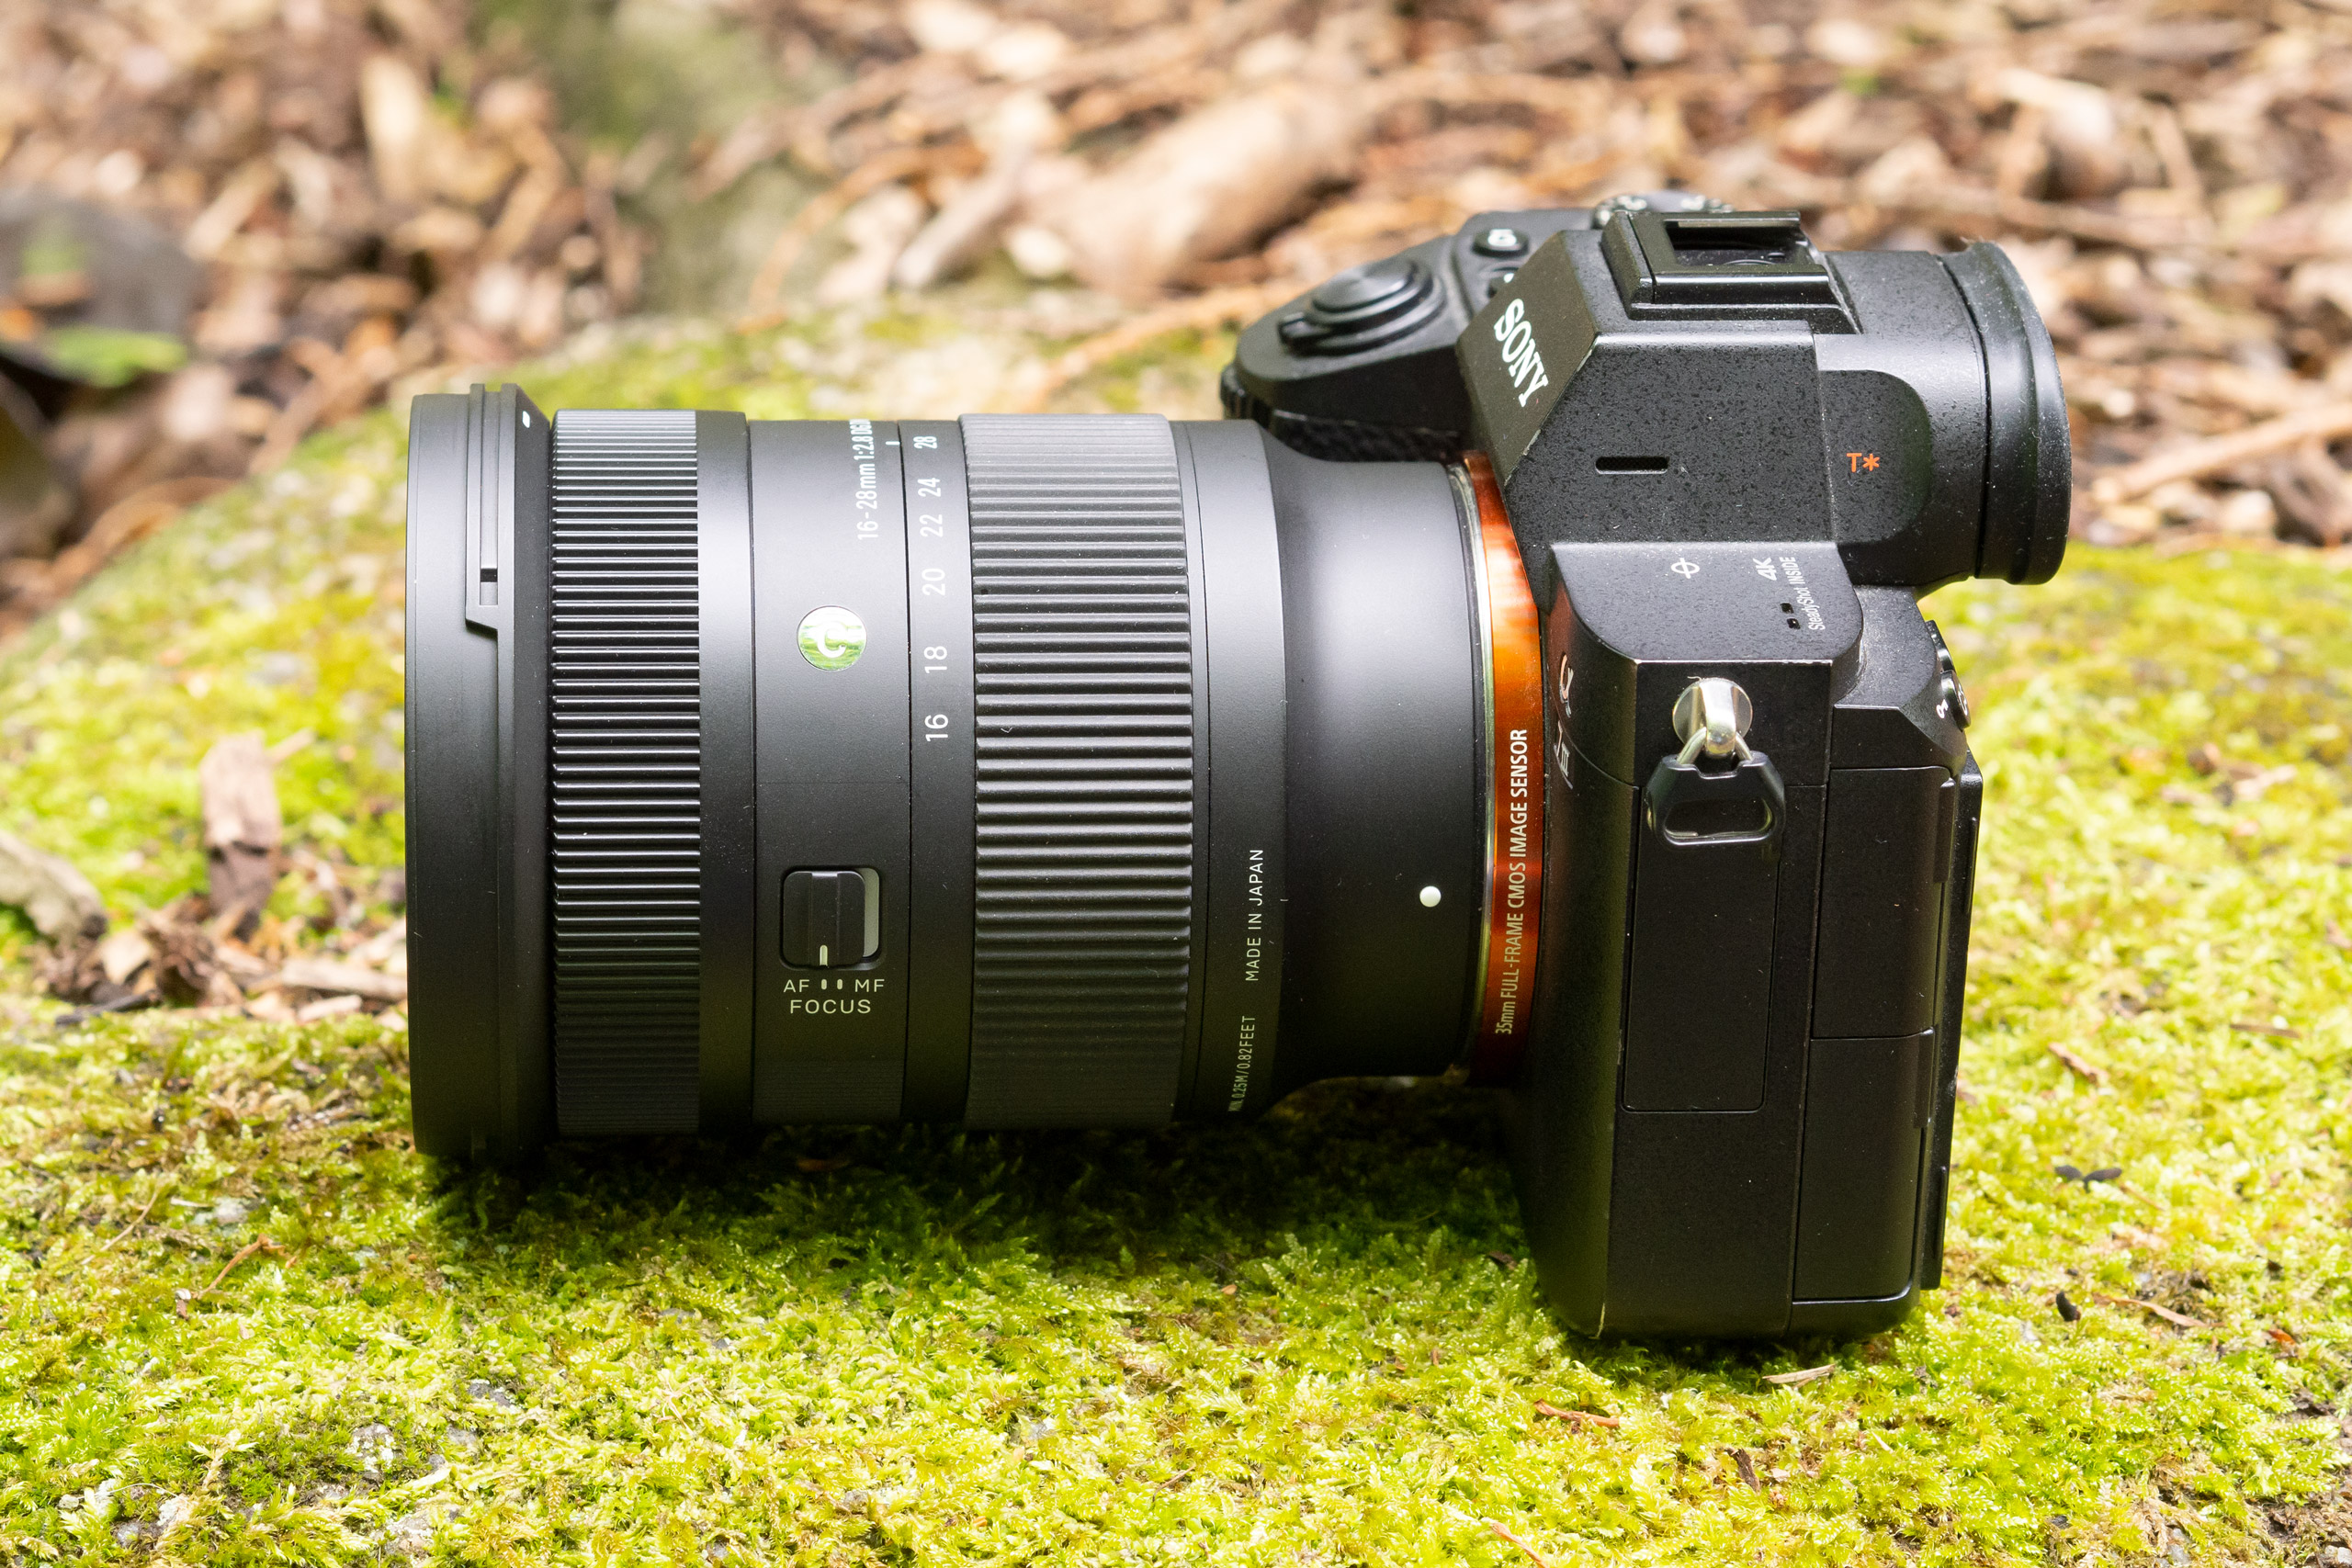 The Sigma 16-28mm lens is a good match for the Sony Alpha A7 series